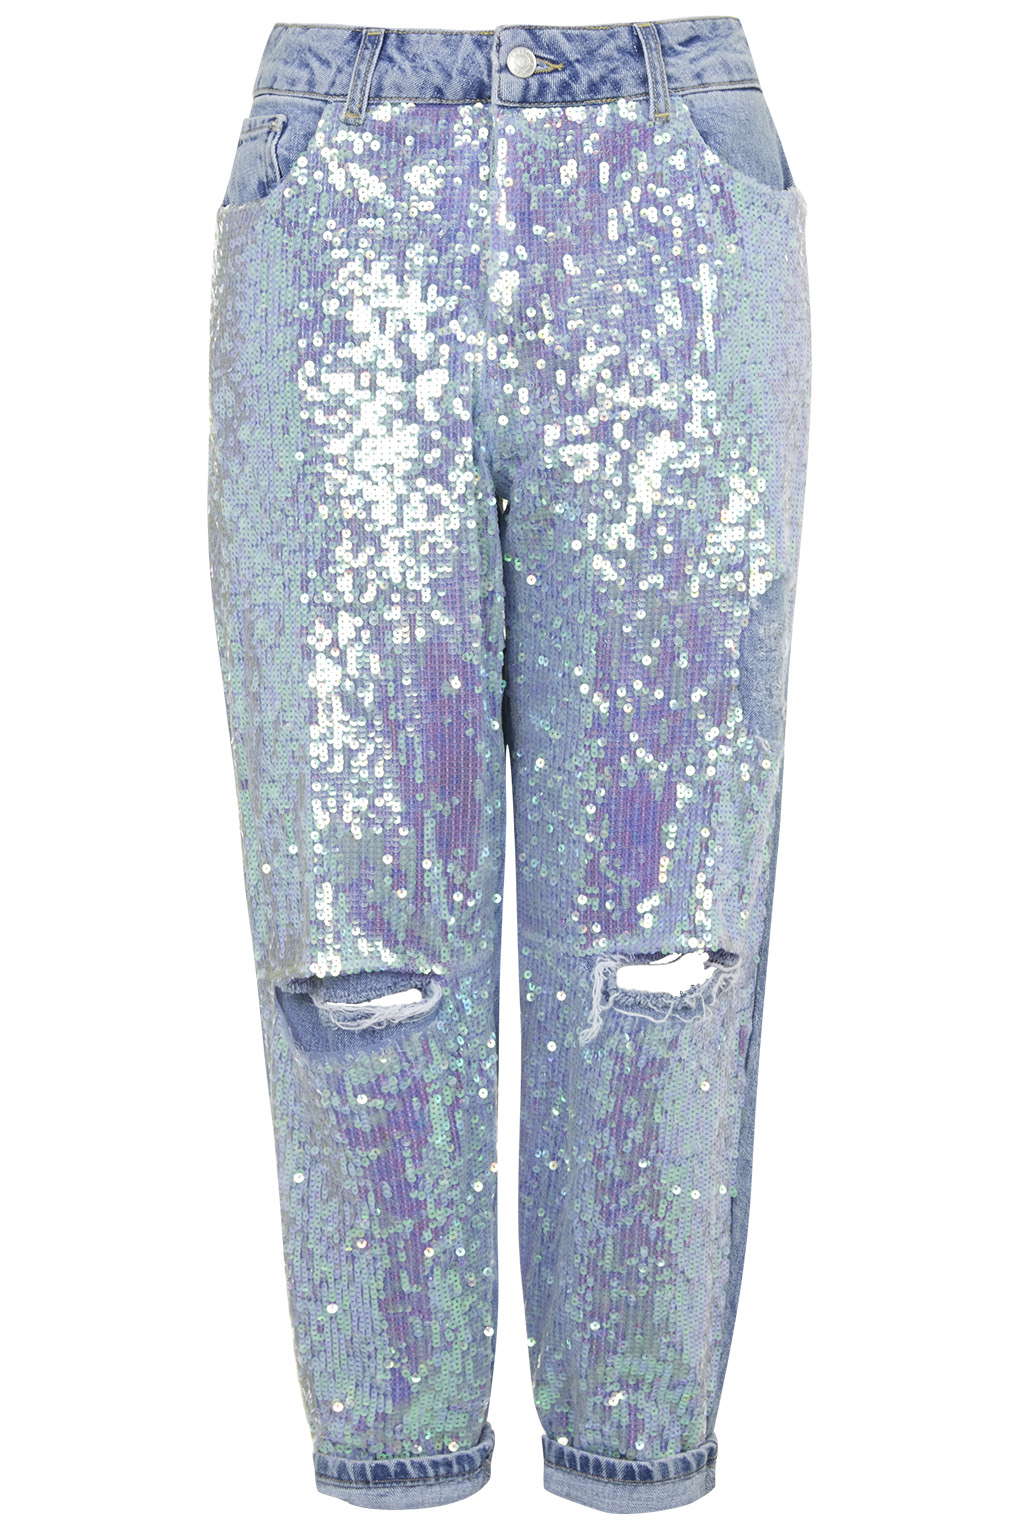 Bomb Product of the Day: Topshop’s Moto Sequin Boyfriend Jeans ...